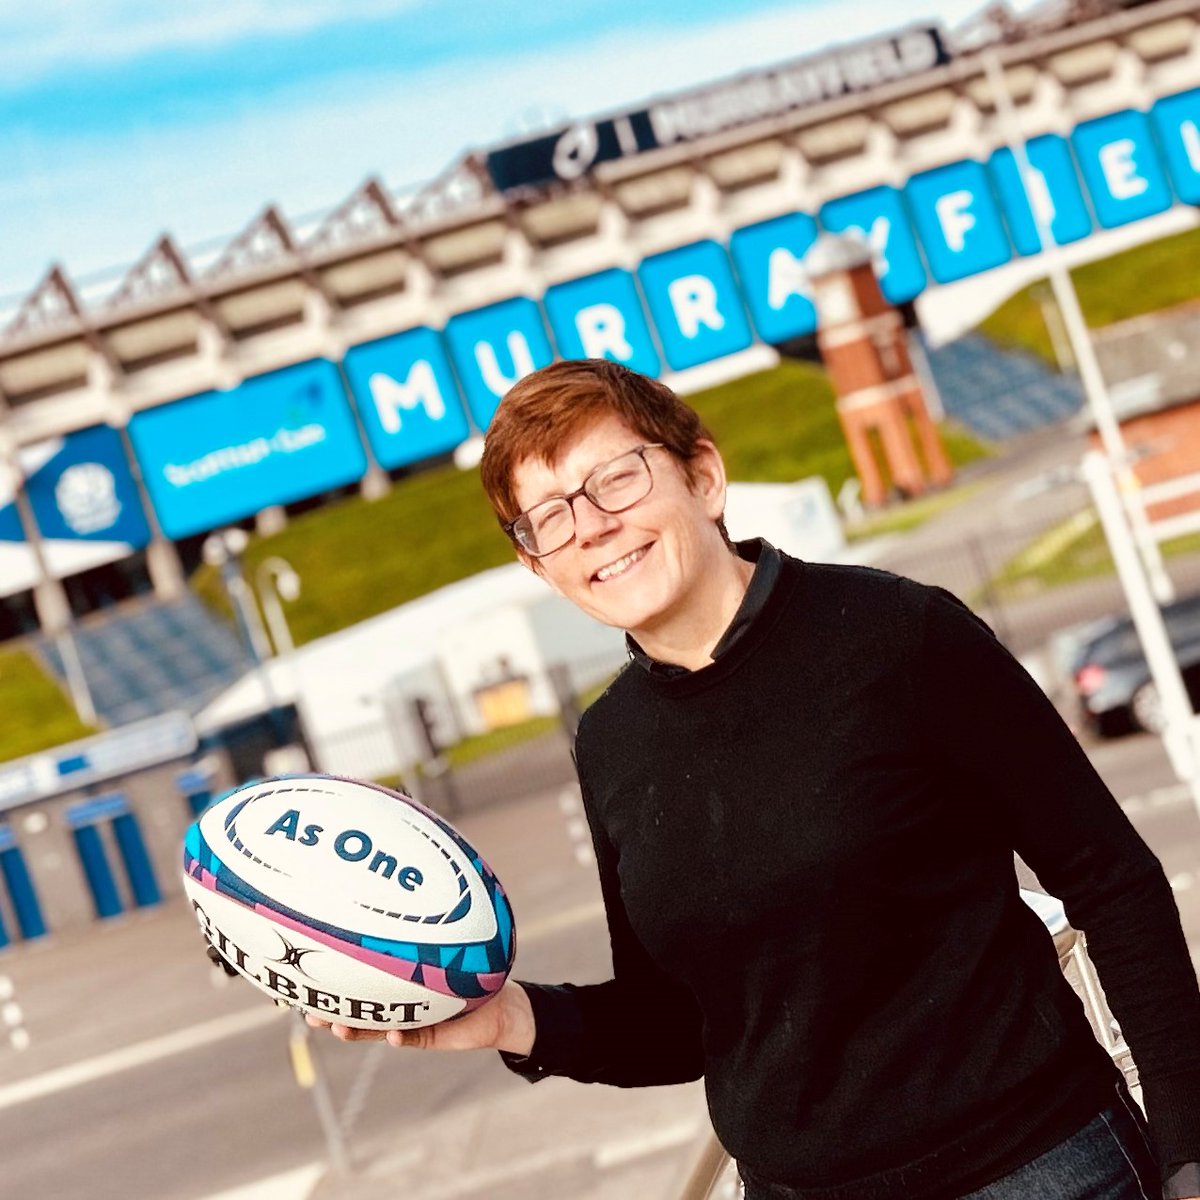 Tomorrow's match ball will be delivered by Sandra Colamartino, Scotland Women’s first captain. We encourage all fans to be in their seats promptly to give her a hugely deserved welcome. #AsOne